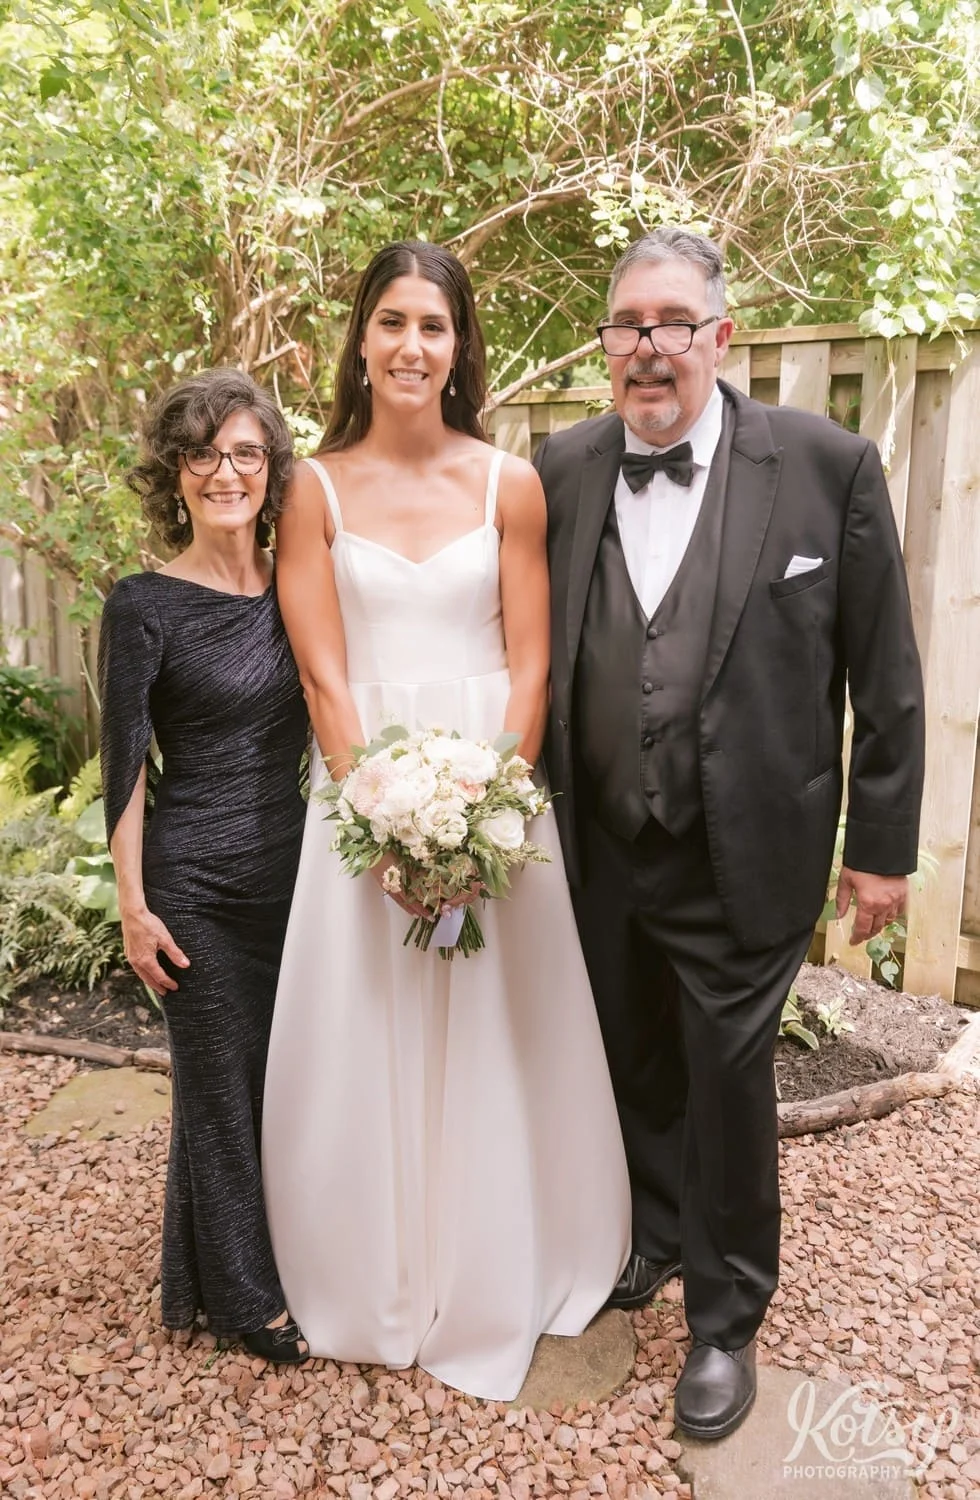 A bride wearing a white wedding down and holding a bouquet of flowers poses for a photo with her parents in a backyard